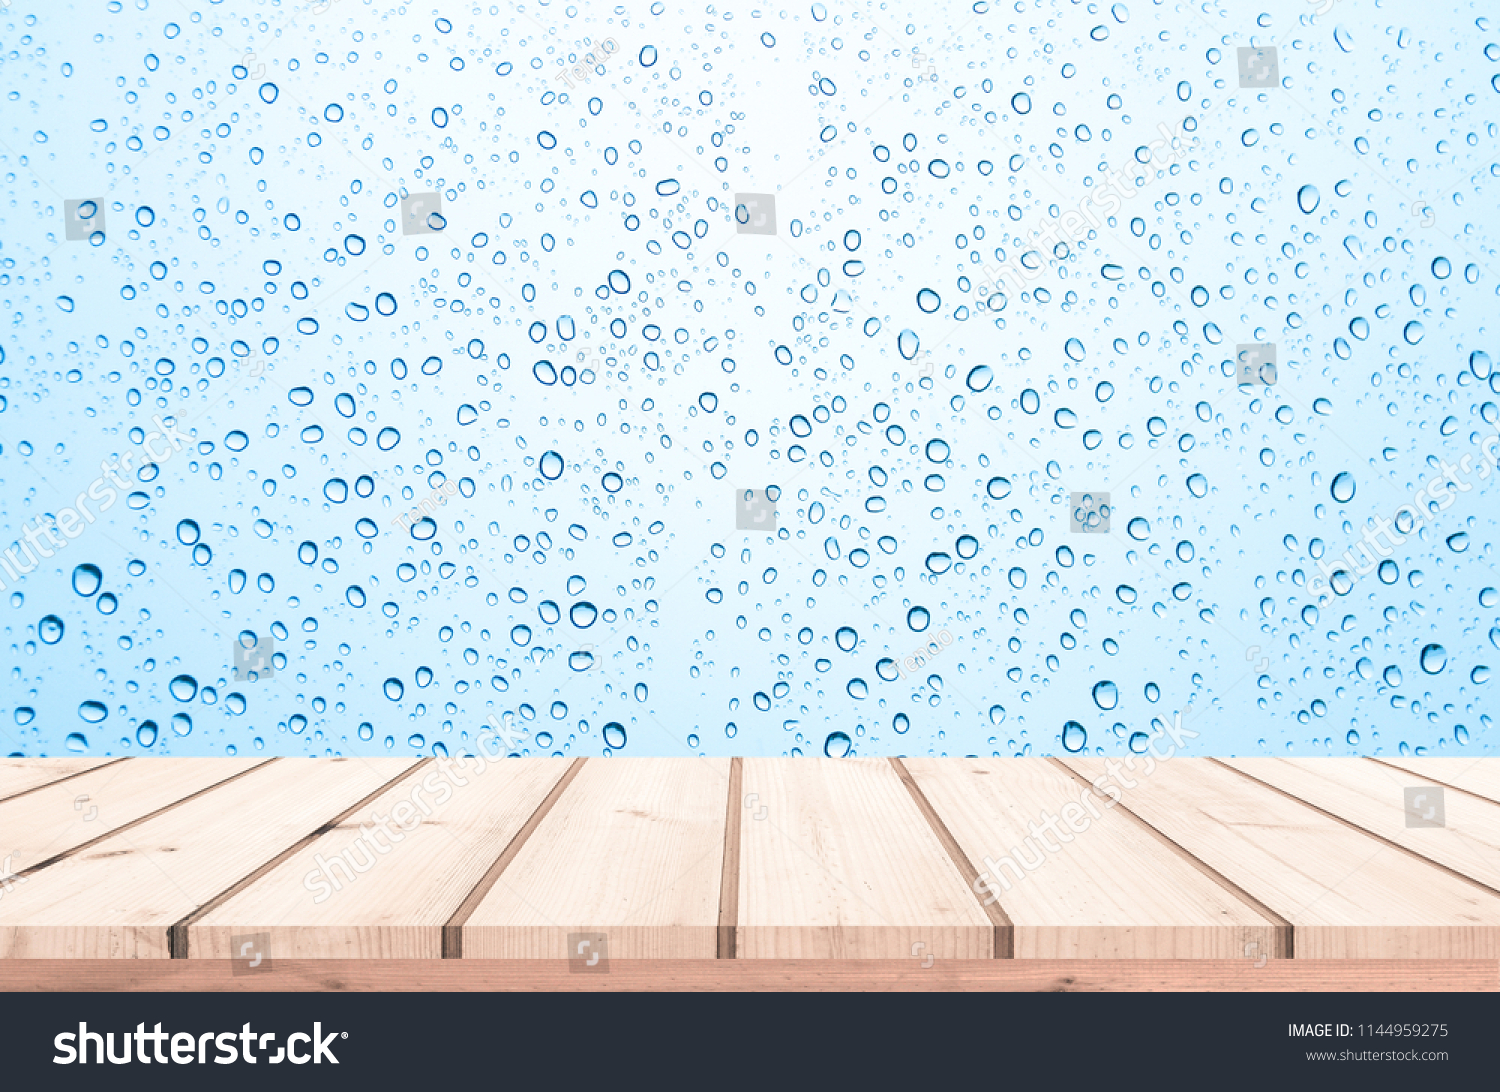 Wood plank with abstract water drop on glass background for product display  #1144959275